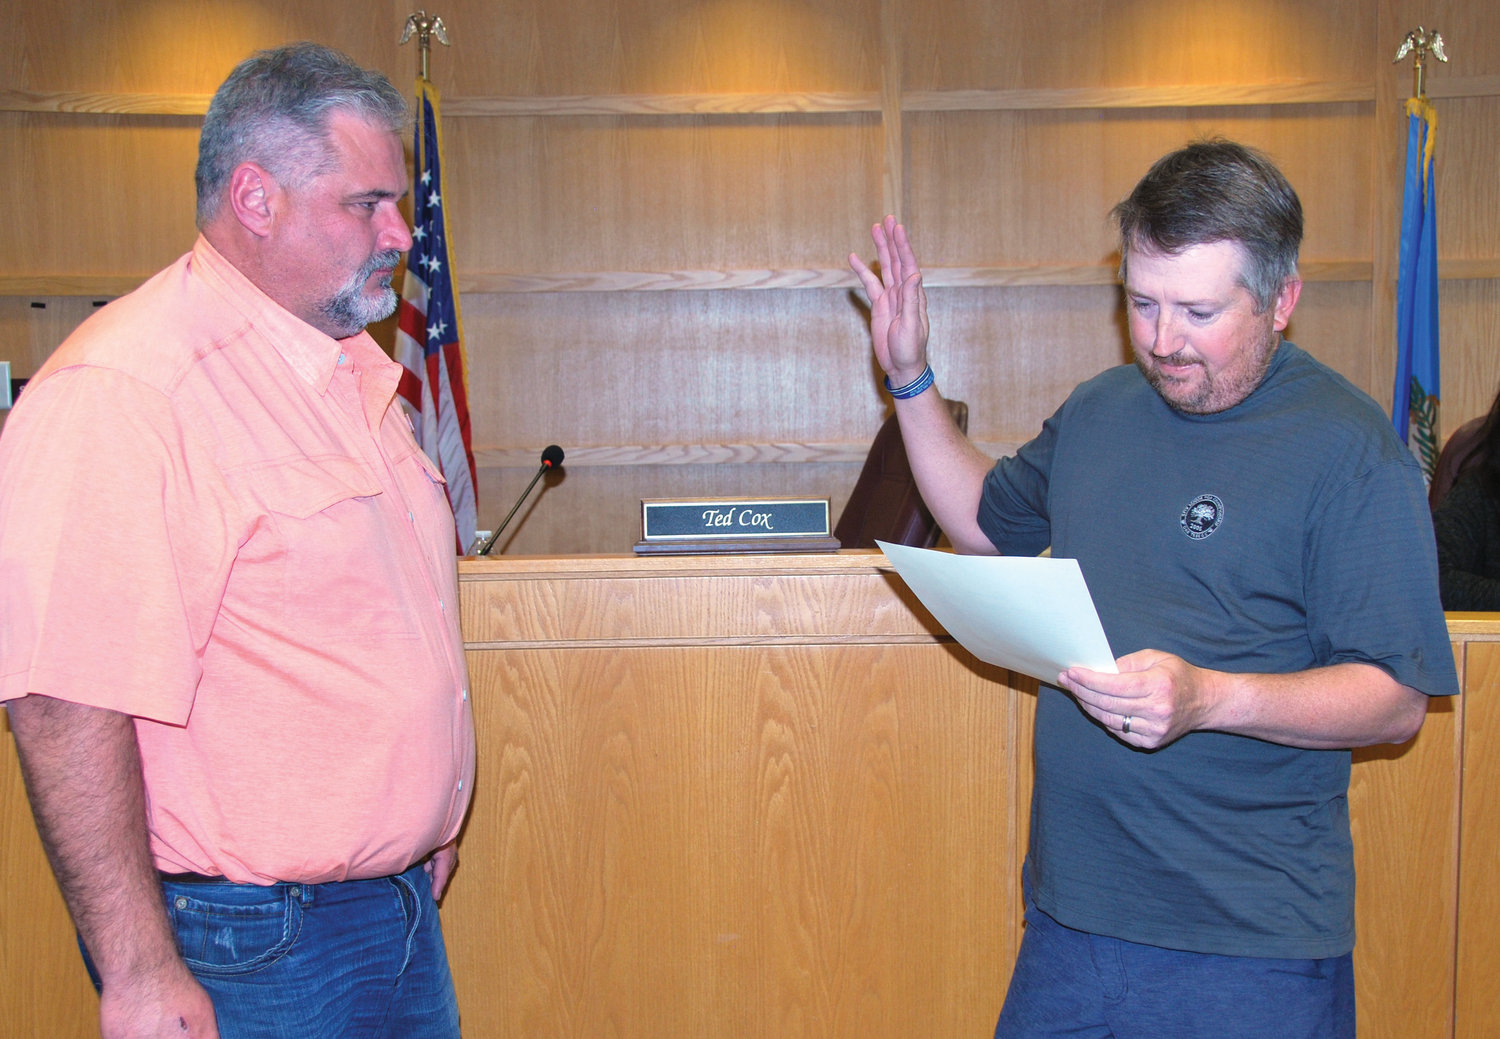 Purcell City Councilman Jay Tate was sworn in by Mayor Ted Cox for another term on the city’s top board Monday night during a special meeting at the Purcell Police Service Building.